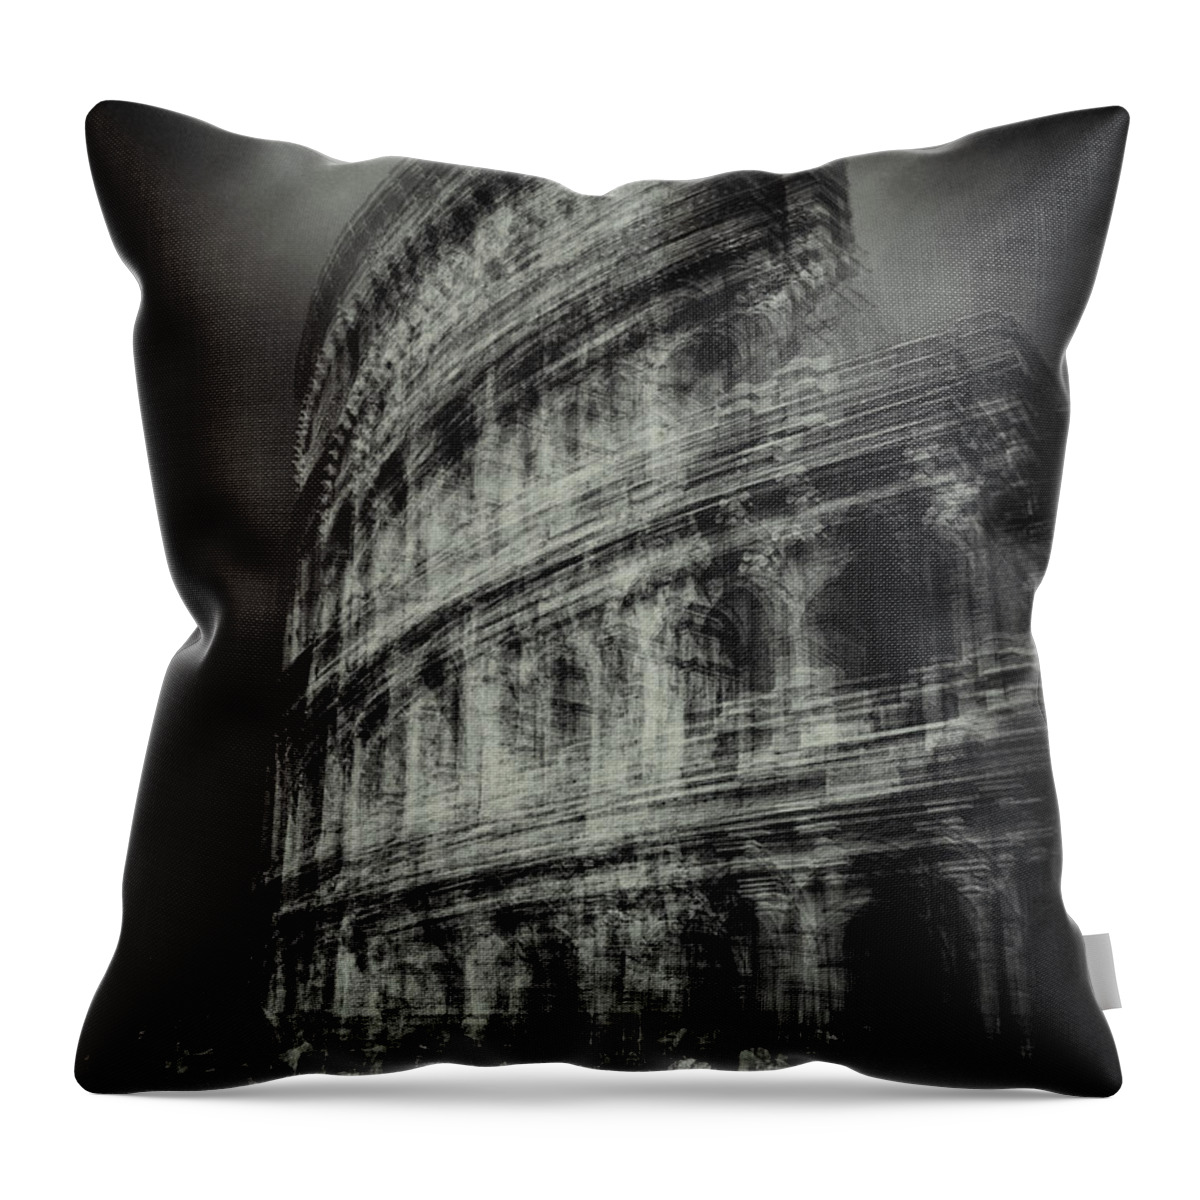 Monochrome Throw Pillow featuring the photograph Colosseo by Grant Galbraith